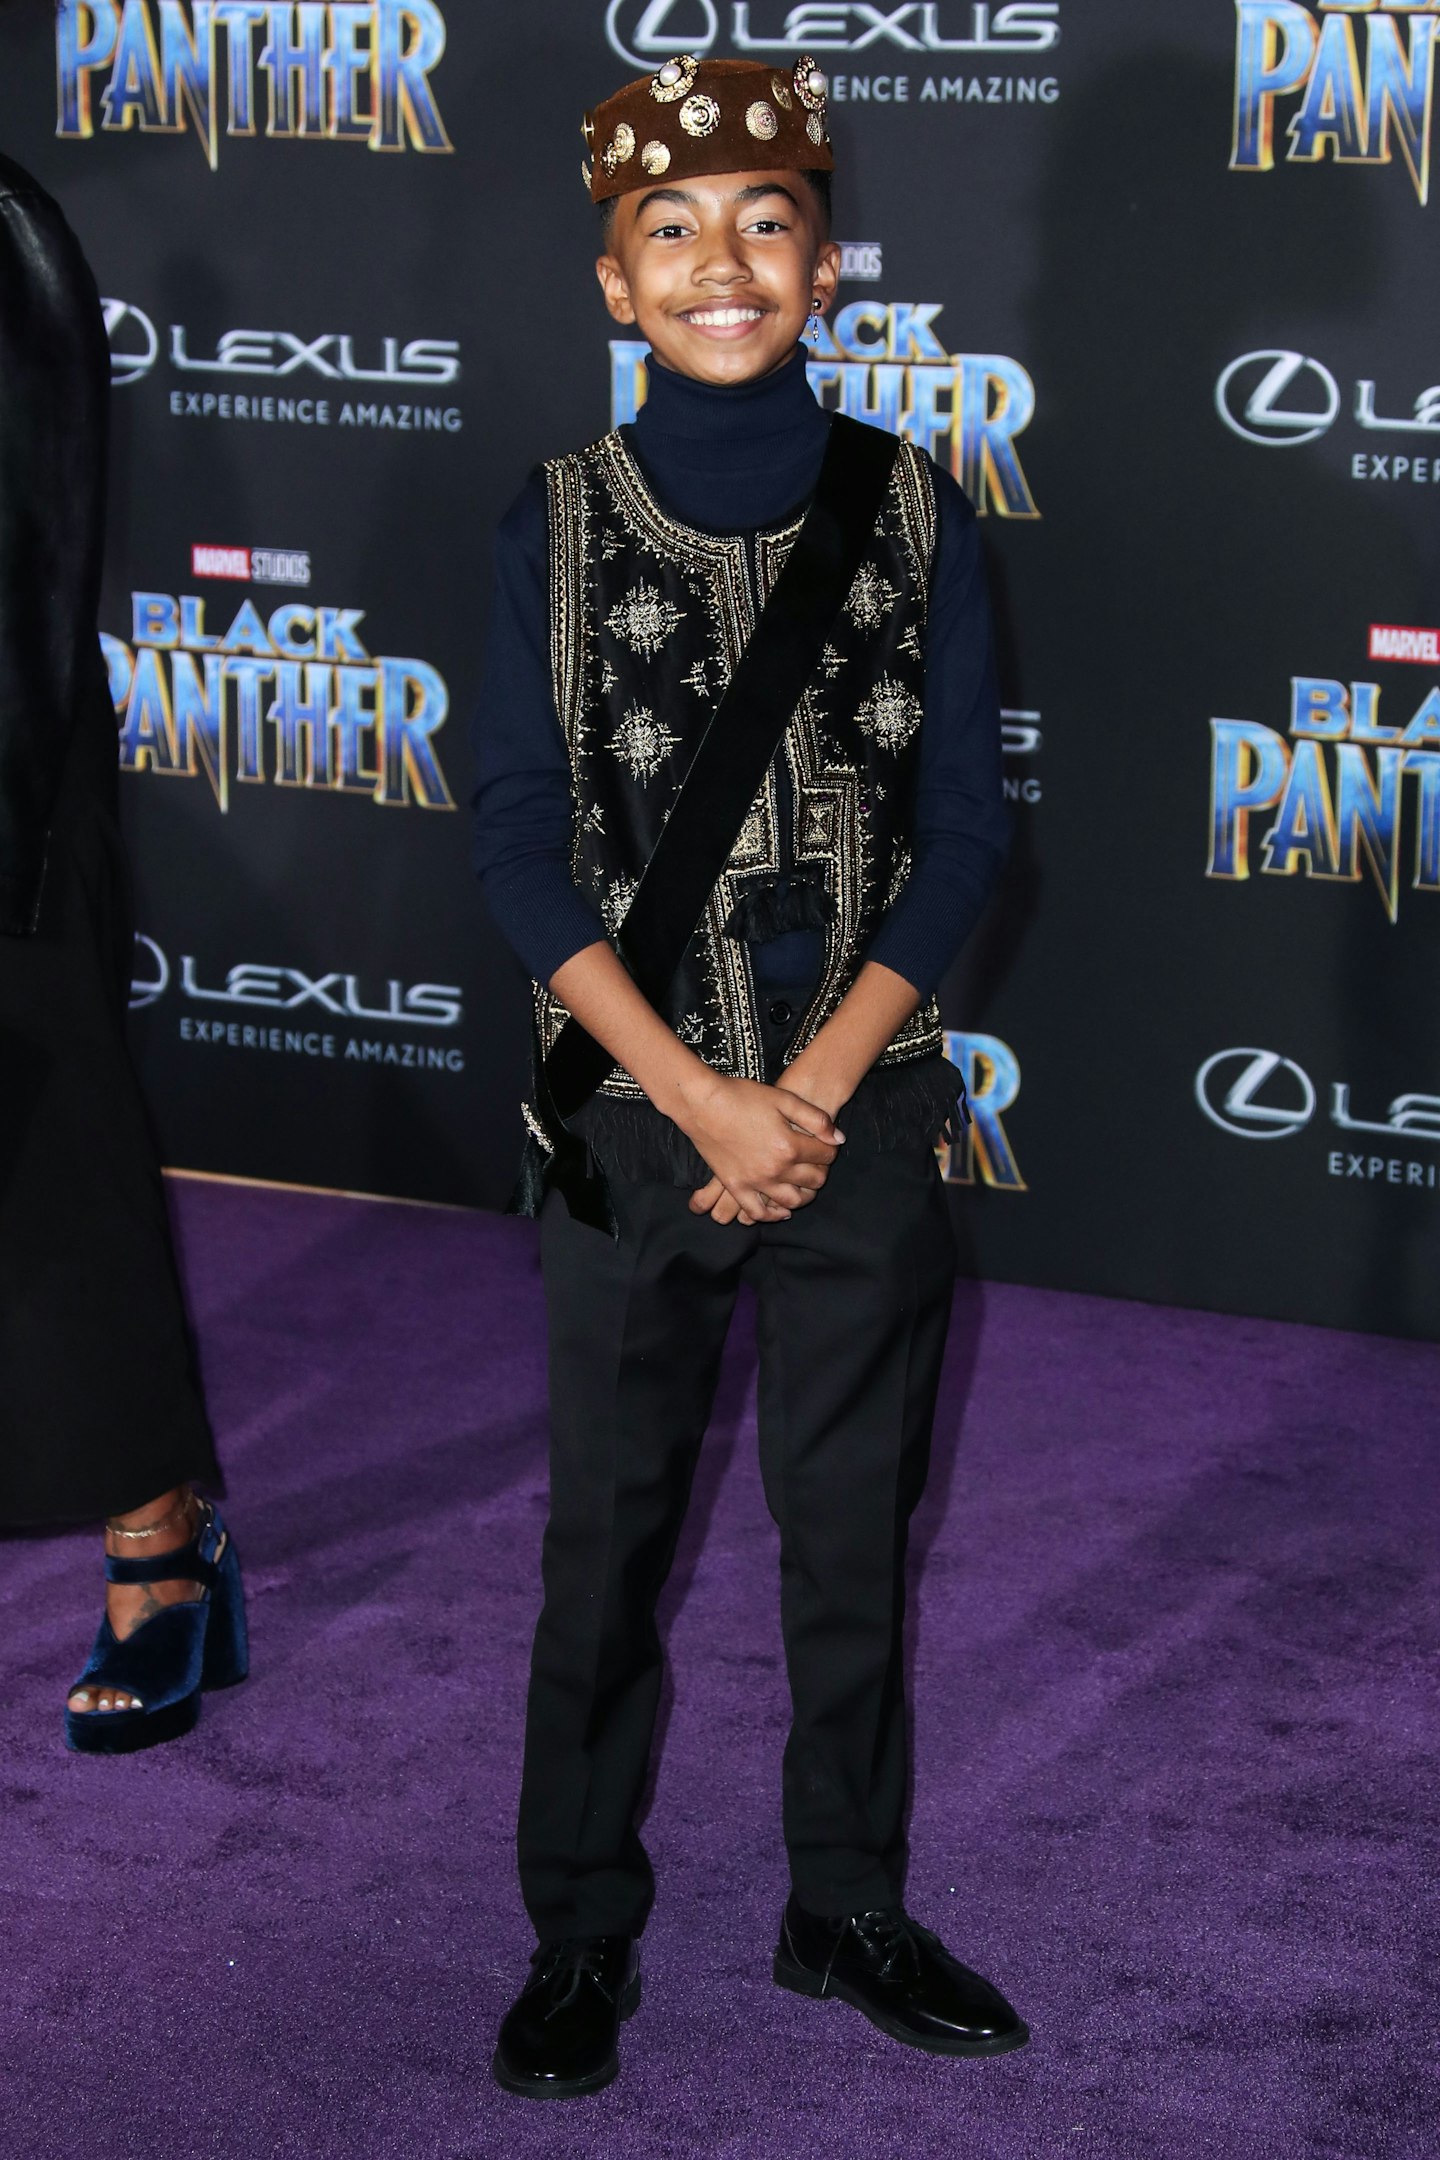 Black Panther Premiere Outfits